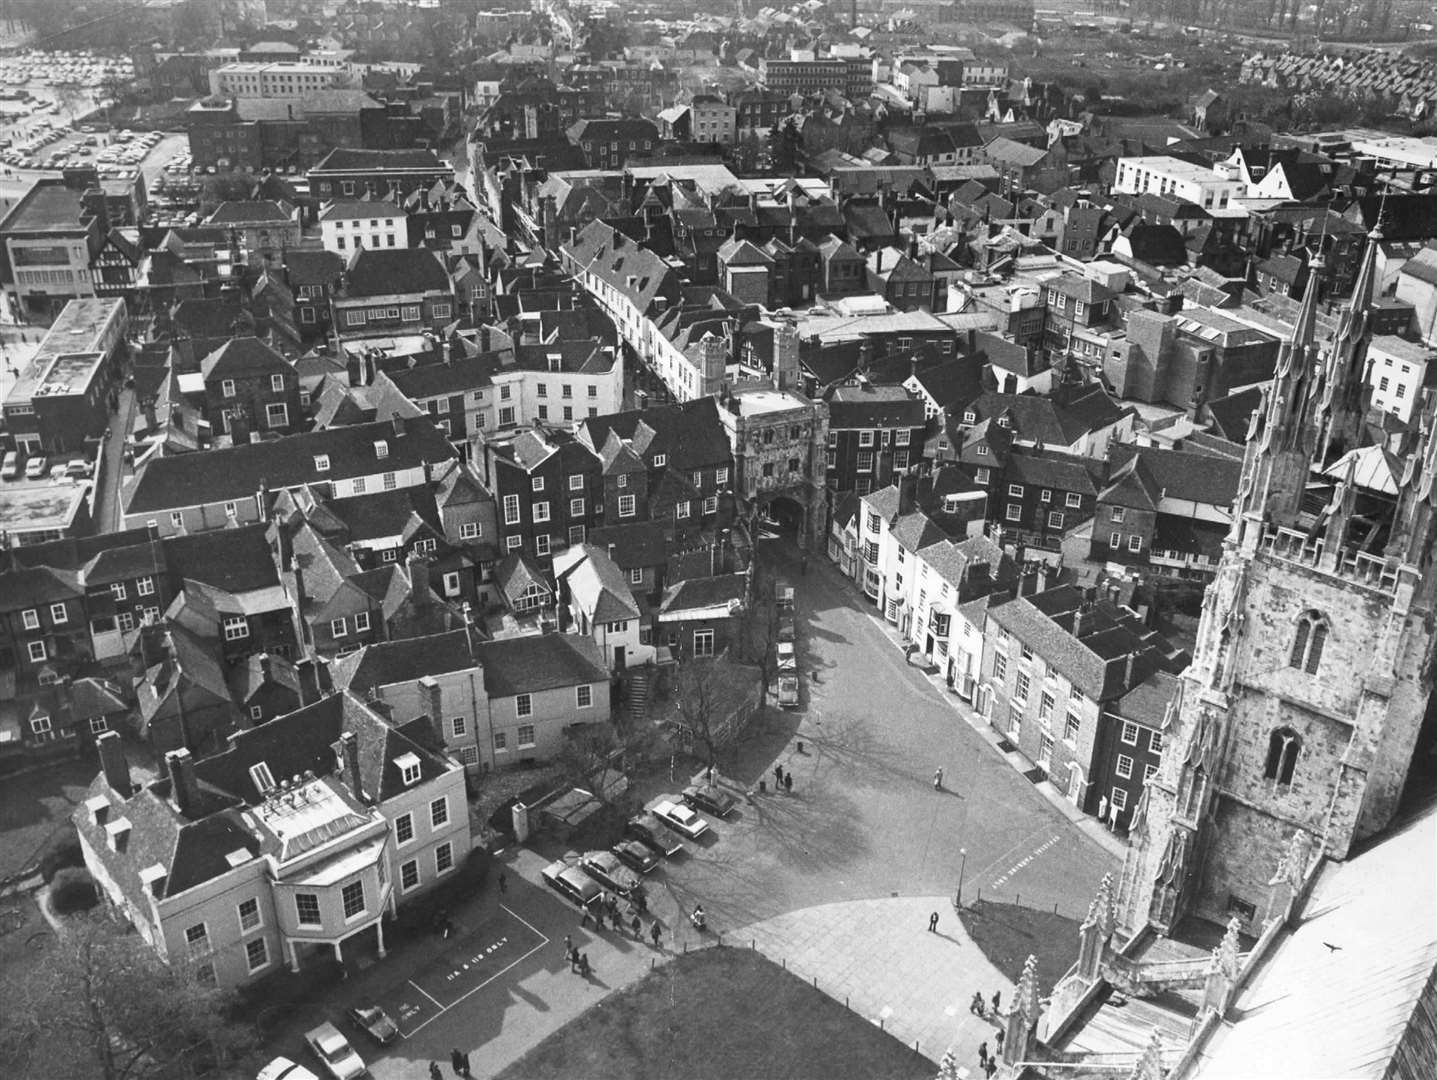 A 1976 view from the Cathedral's Bell Harry tower looking towards Mercery Lane and the high street